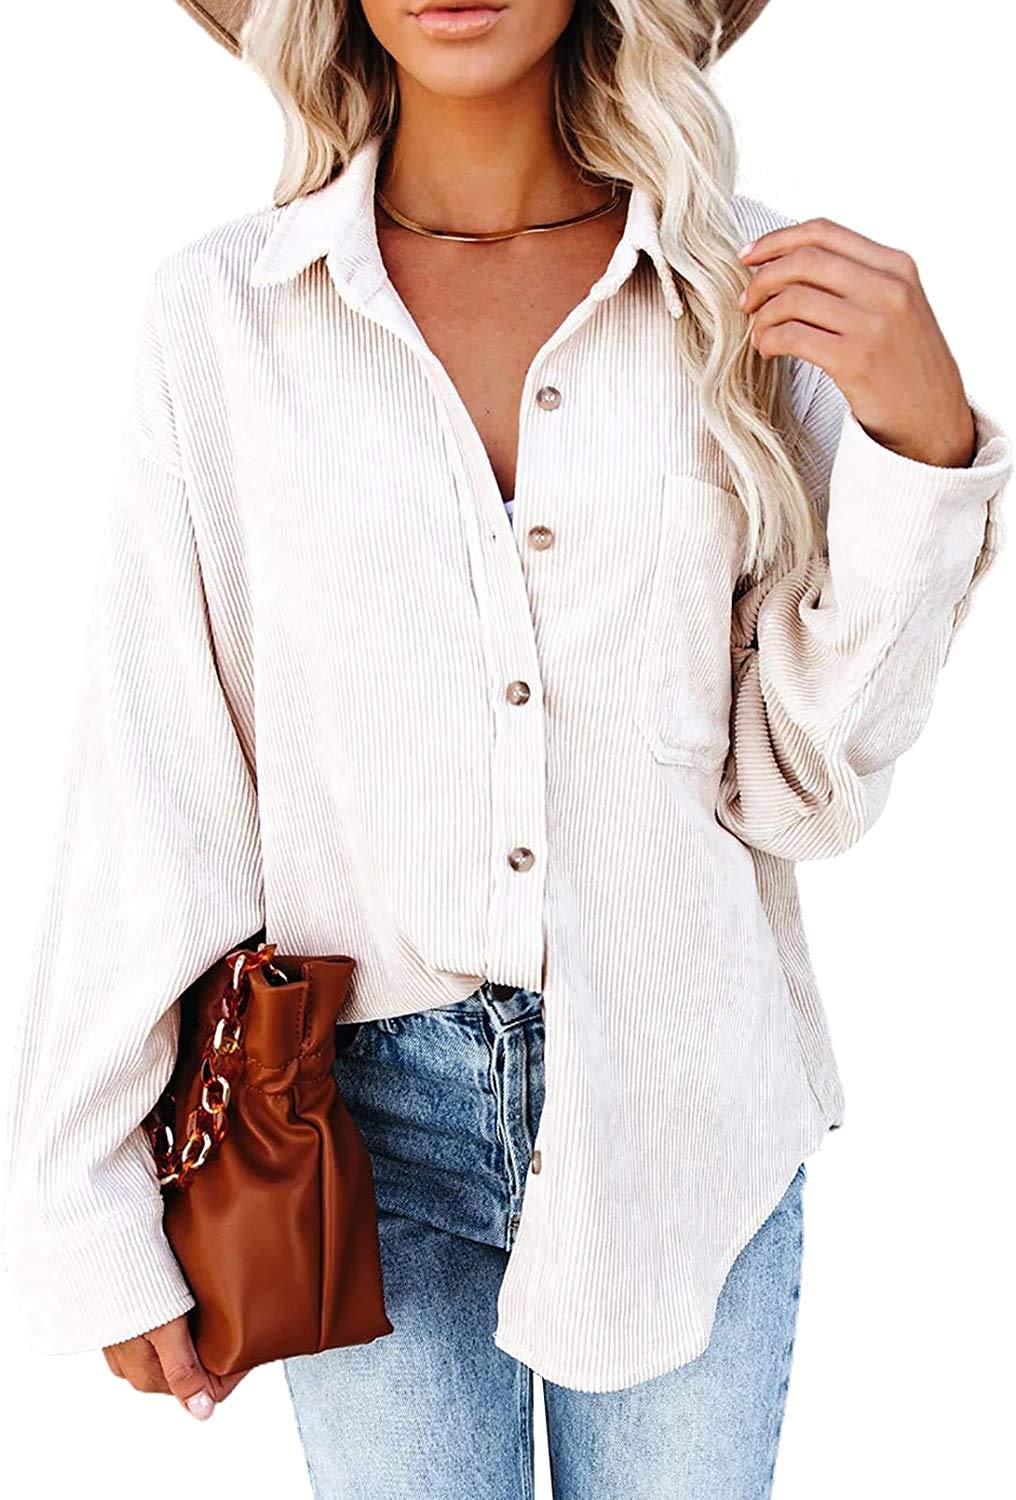 Niuer Women Solid Color Button Down Tunic Shirt Ladies Loose Tops Lapel  Neck Holiday Corduroy Casual Blouse Beige M 